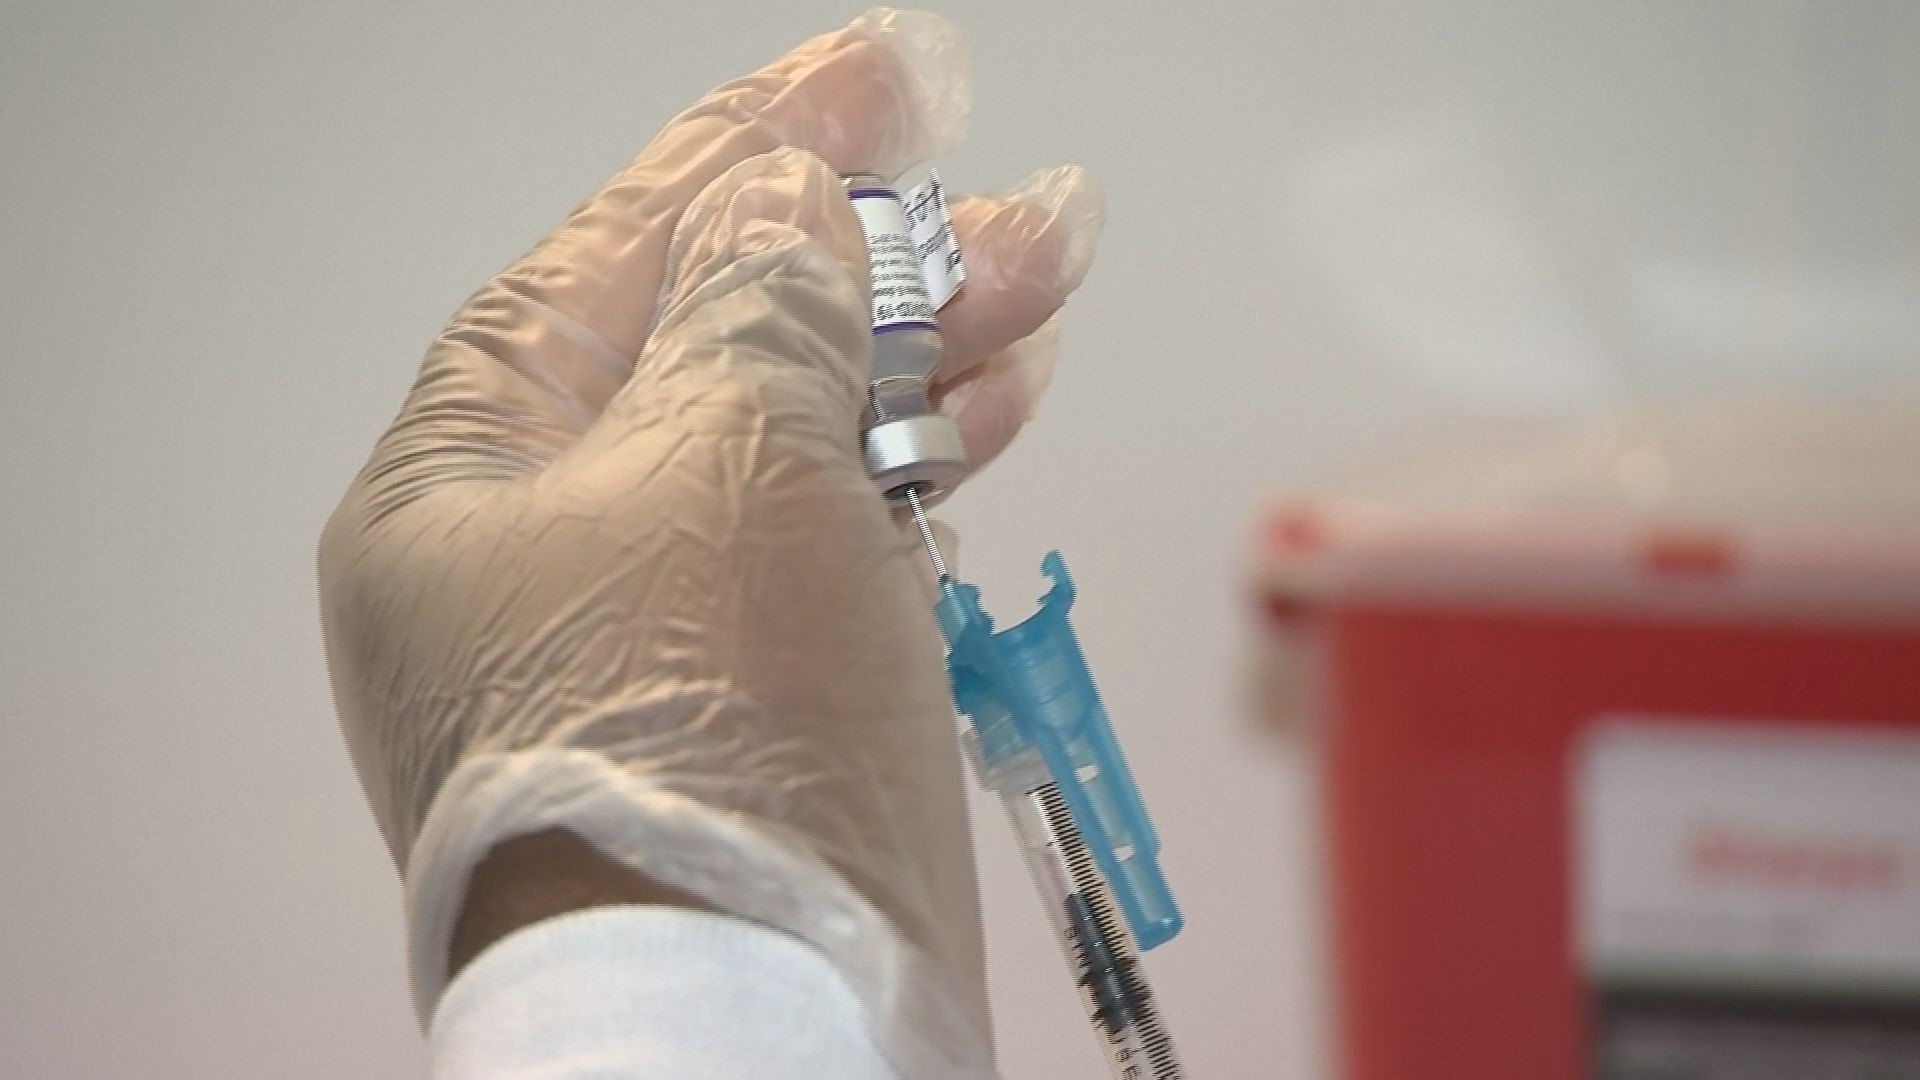 Local communities push for young kids to get vaccinated.